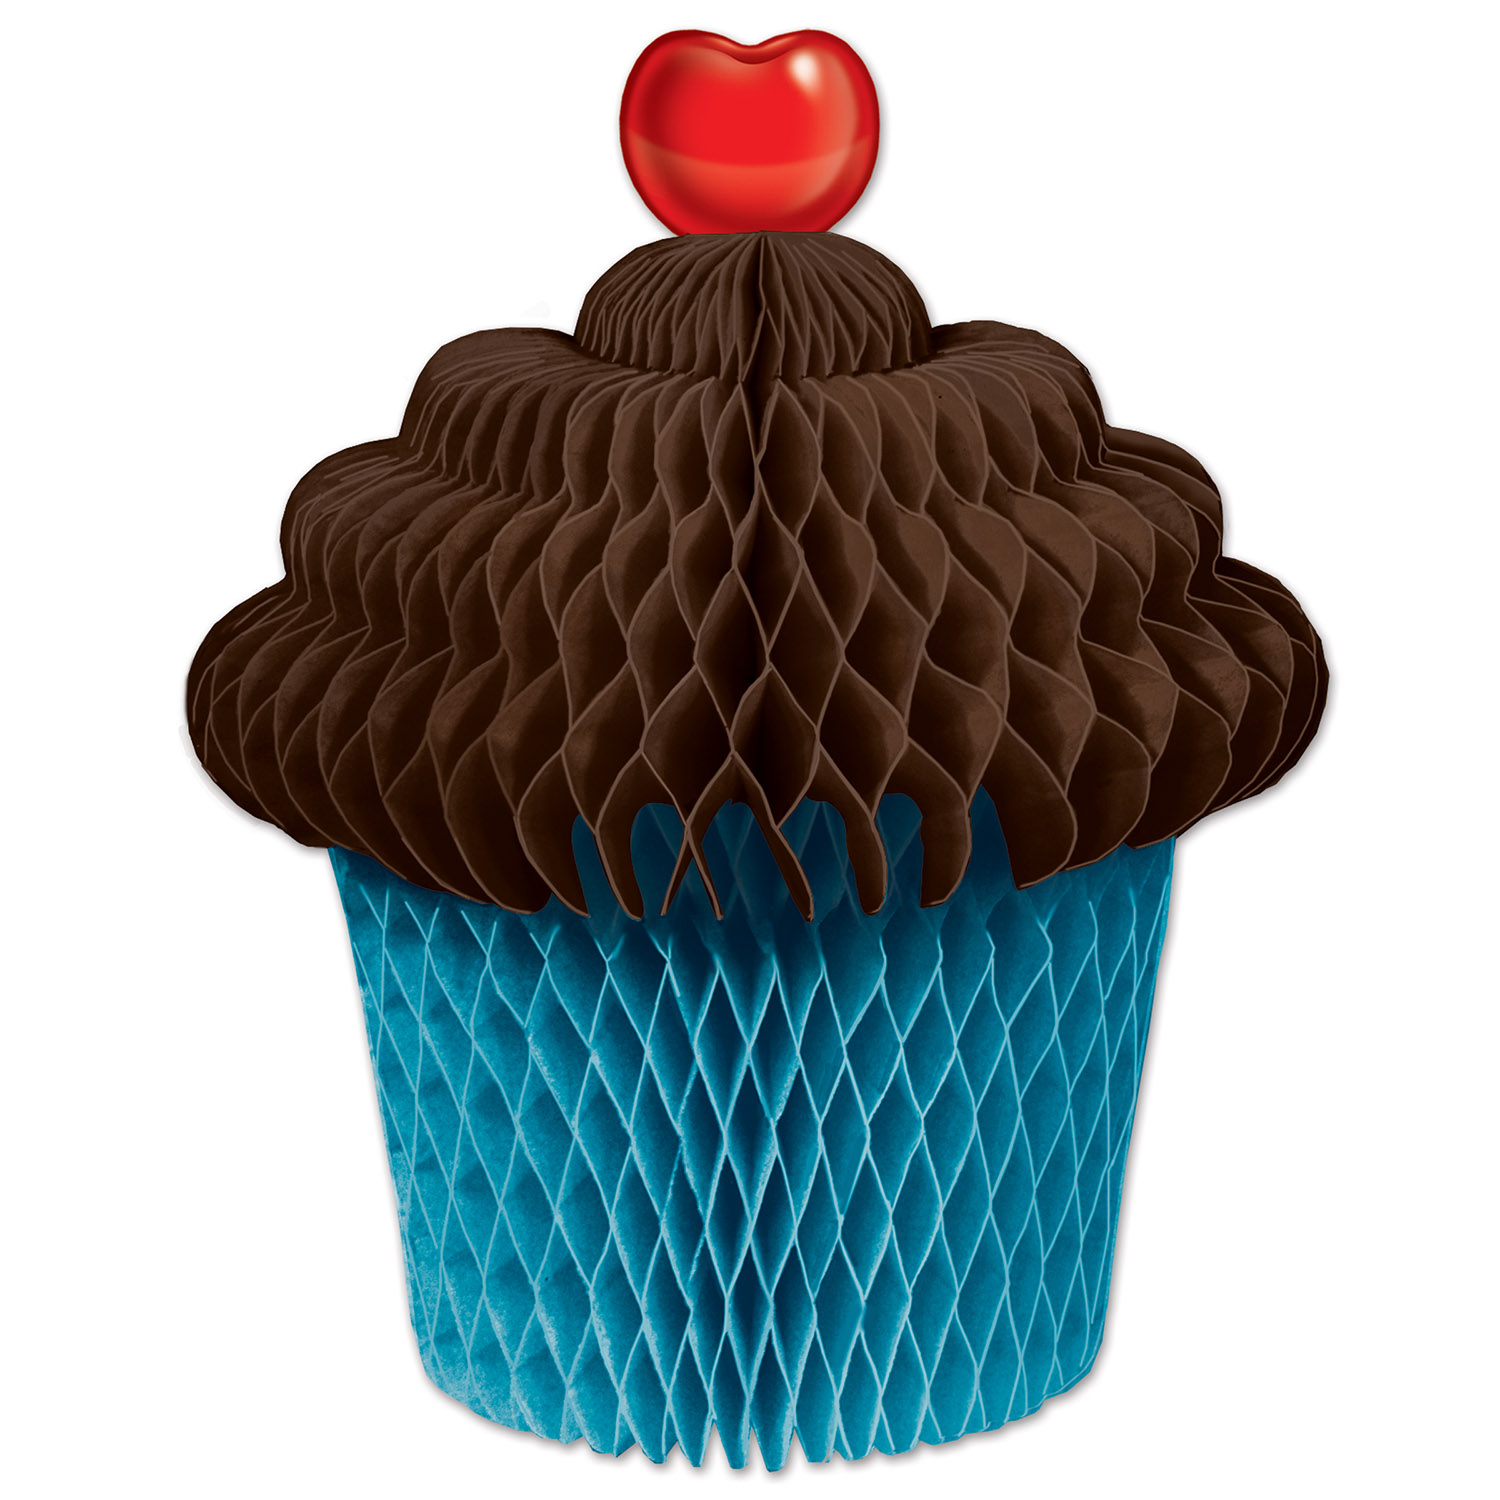 12 Wholesale Tissue Cupcake Centerpiece Brown & Turquoise